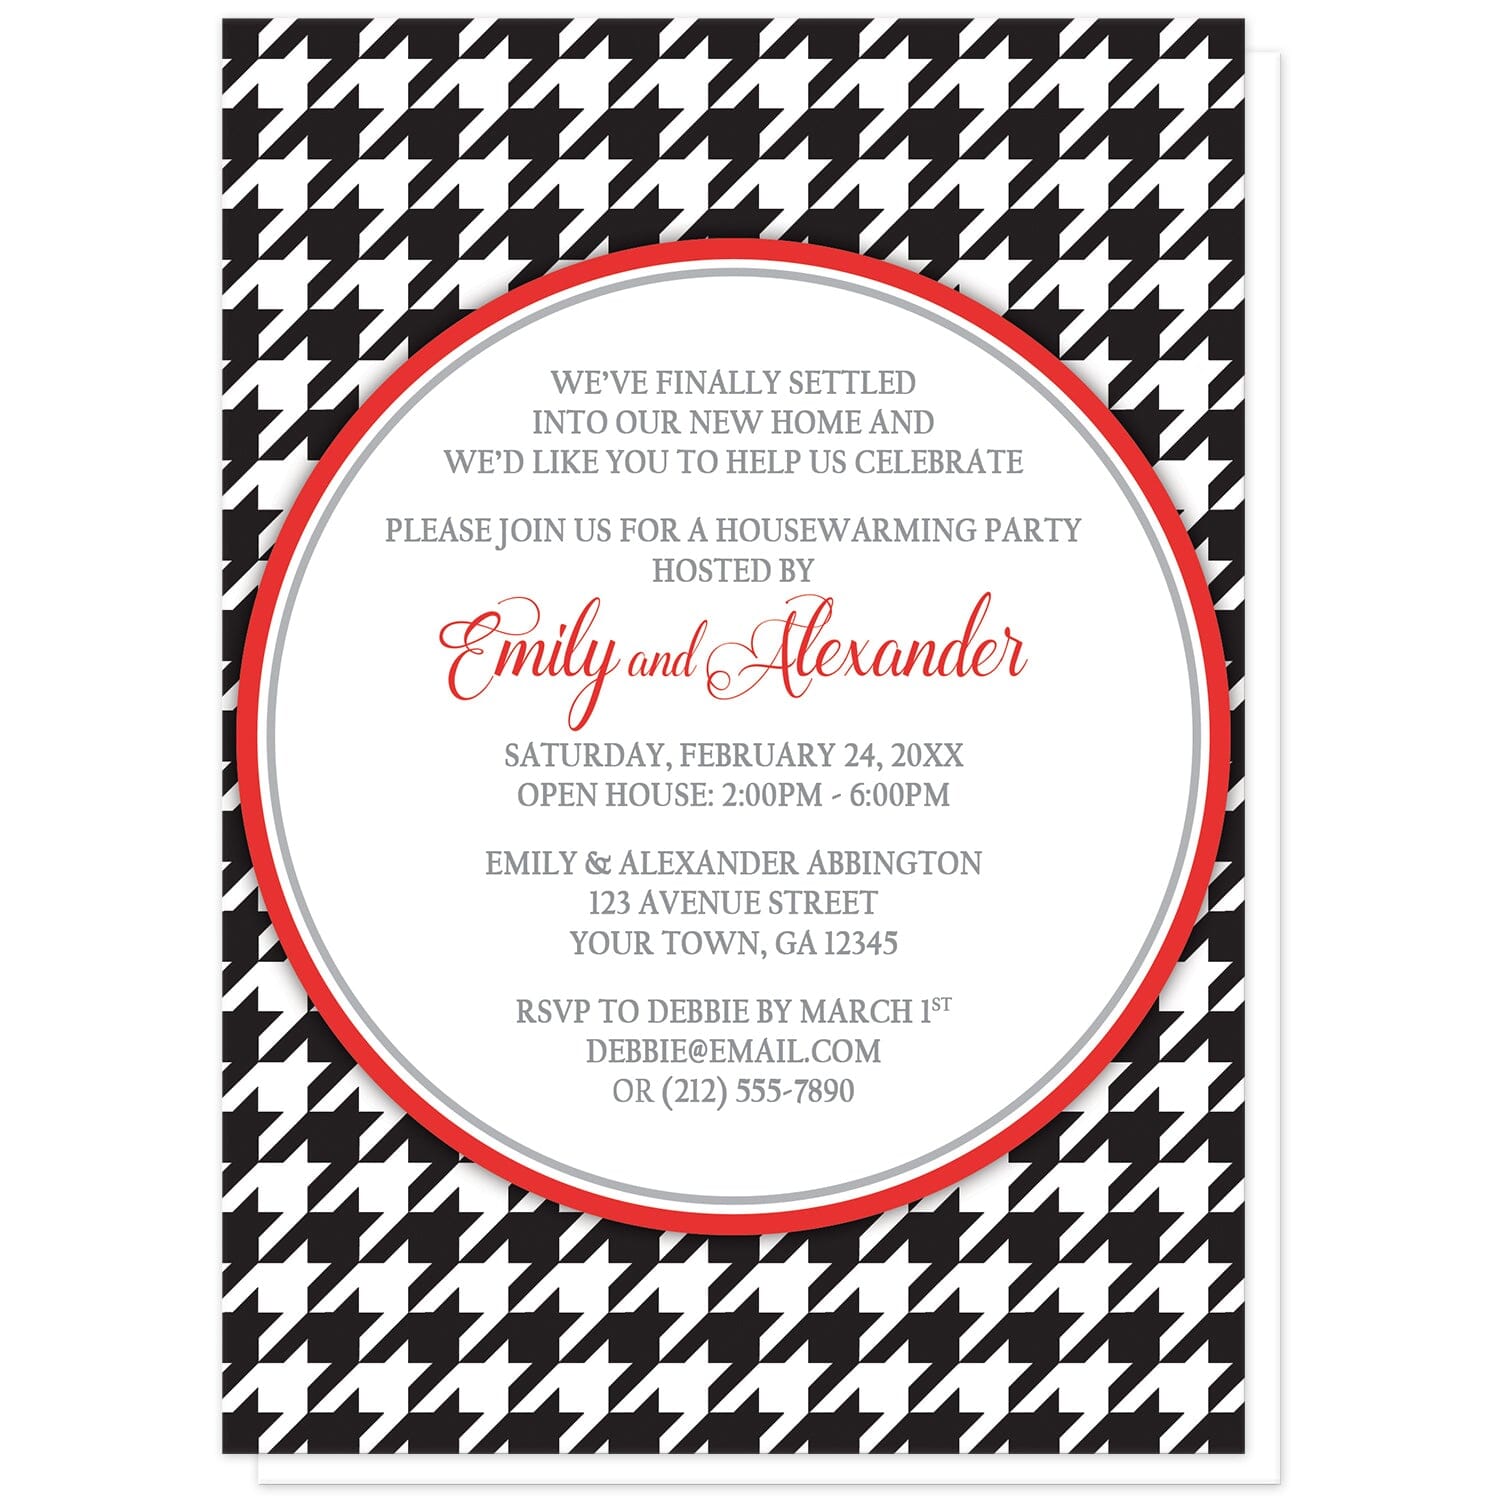 Stylish Black Houndstooth Red Housewarming Invitations at Artistically Invited. Stylish black houndstooth red housewarming invitations with your personalized celebration details custom printed in red and gray inside a white circle over a black and white houndstooth pattern. 